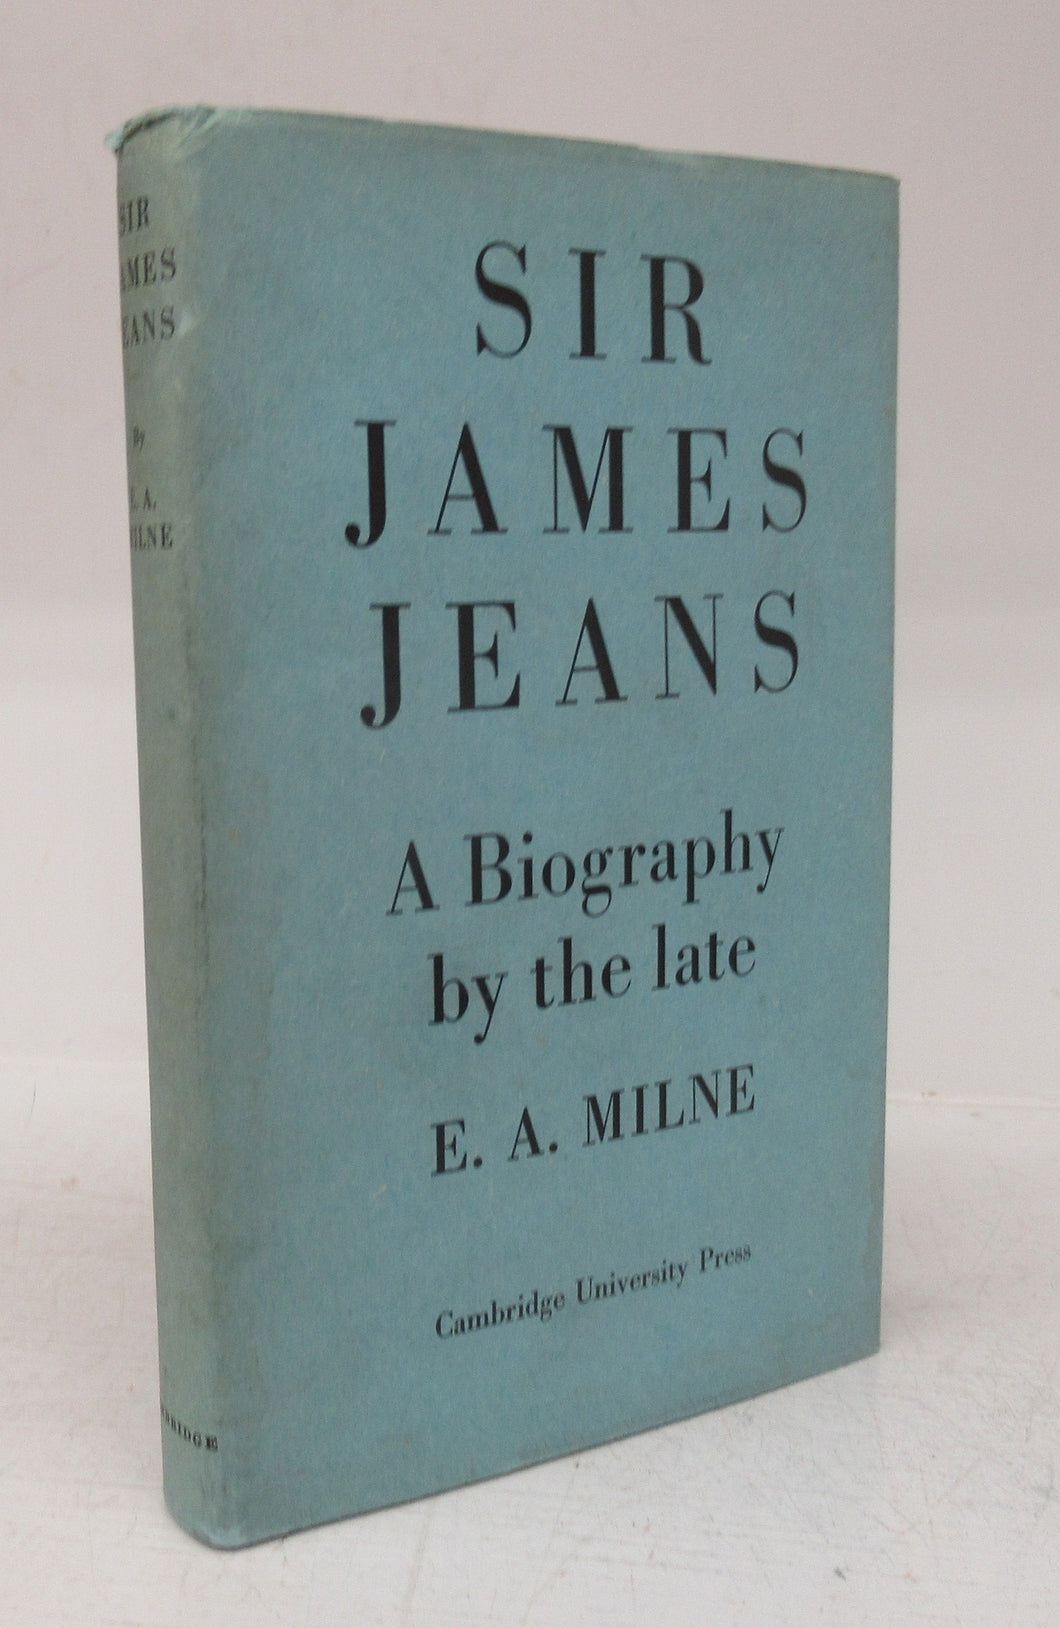 Sir James Jeans: A Biography by the late E. A. Milne